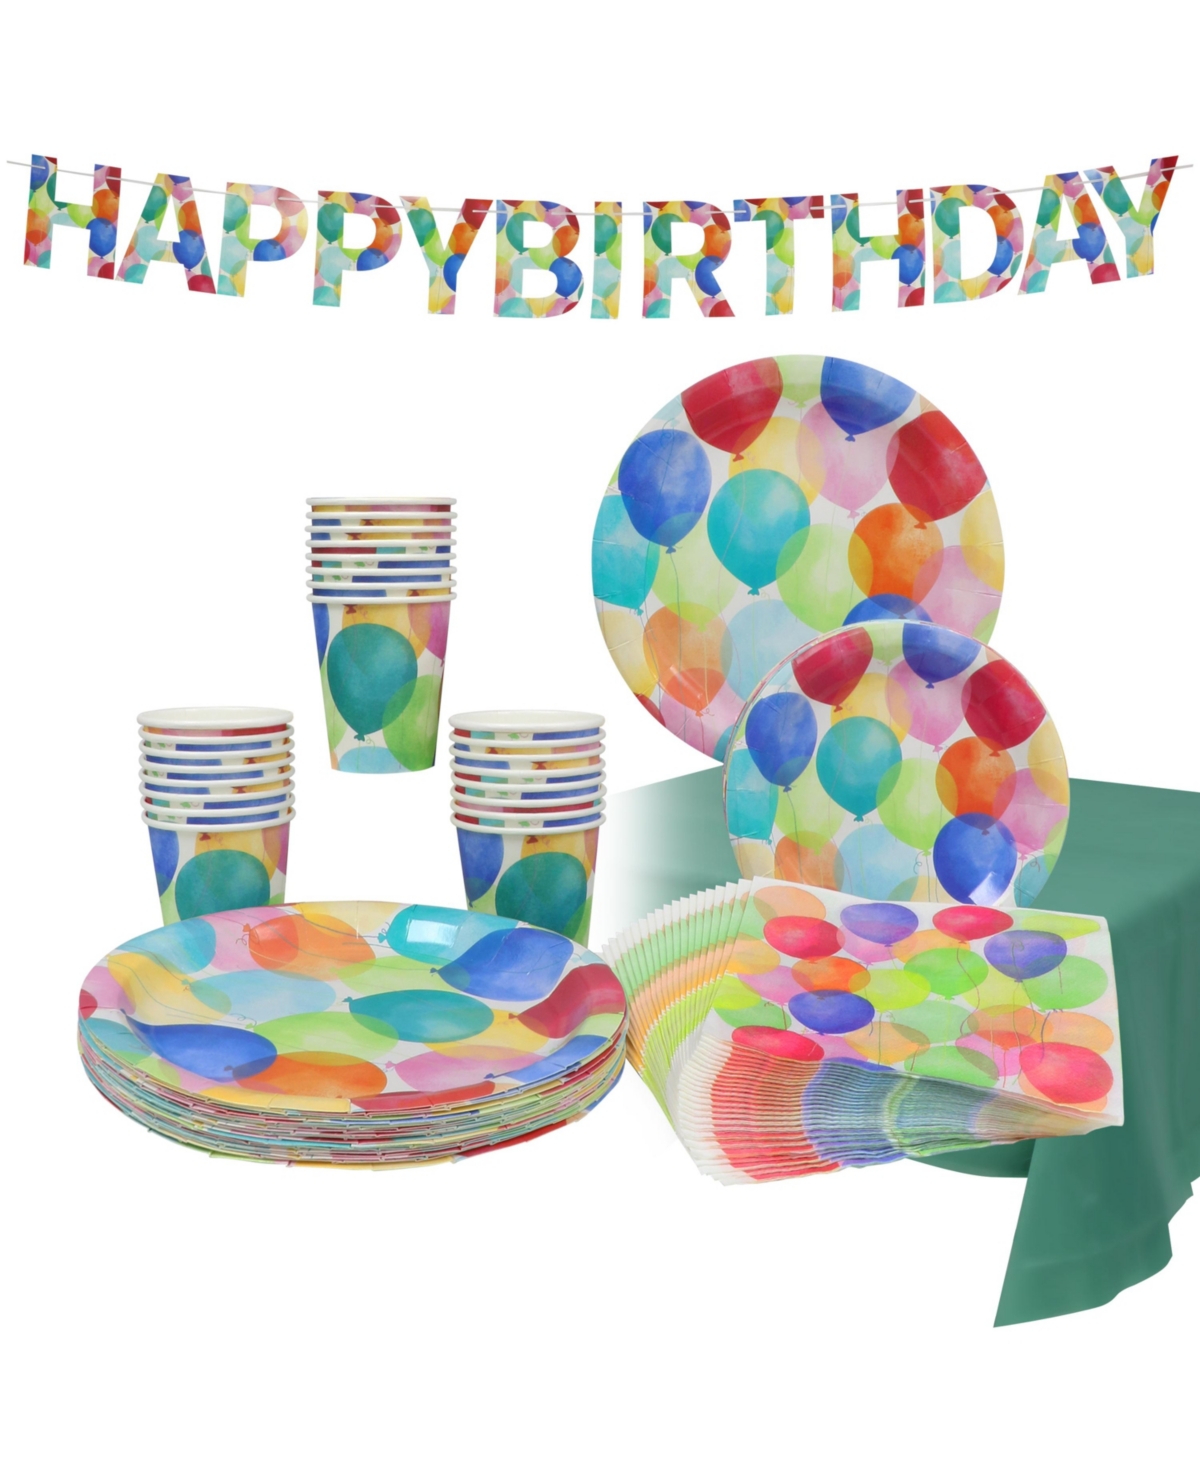 Puleo Disposable Birthday Party Set, Serves 24, With Large And Small Paper Plates, Paper Cups, Straws, Nap In Green